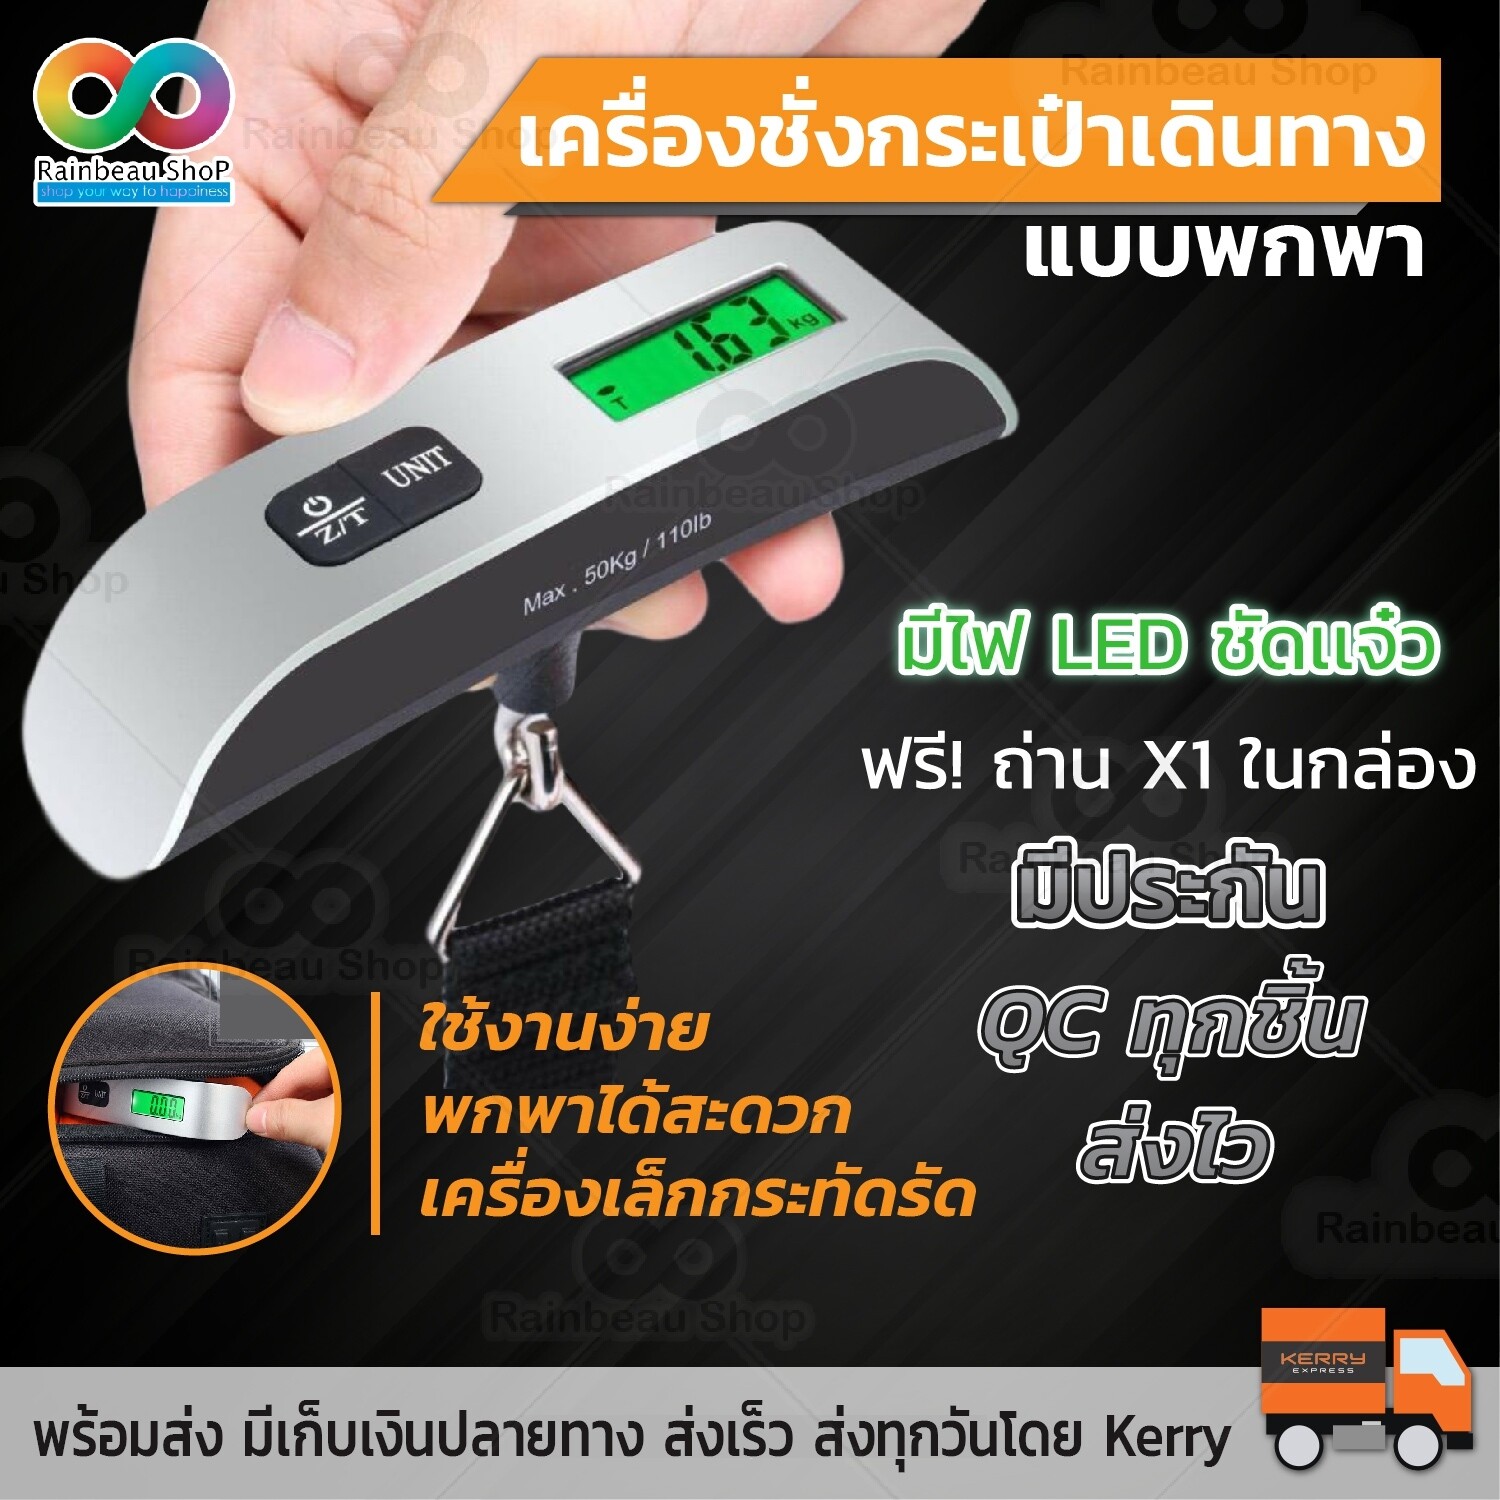 LCD Display Digital Luggage Scale 110lb/50kg Electronic Balance Digital Postal Luggage Hanging Scale with Rubber Paint Handle,Temperature Sensor, Silver/Black